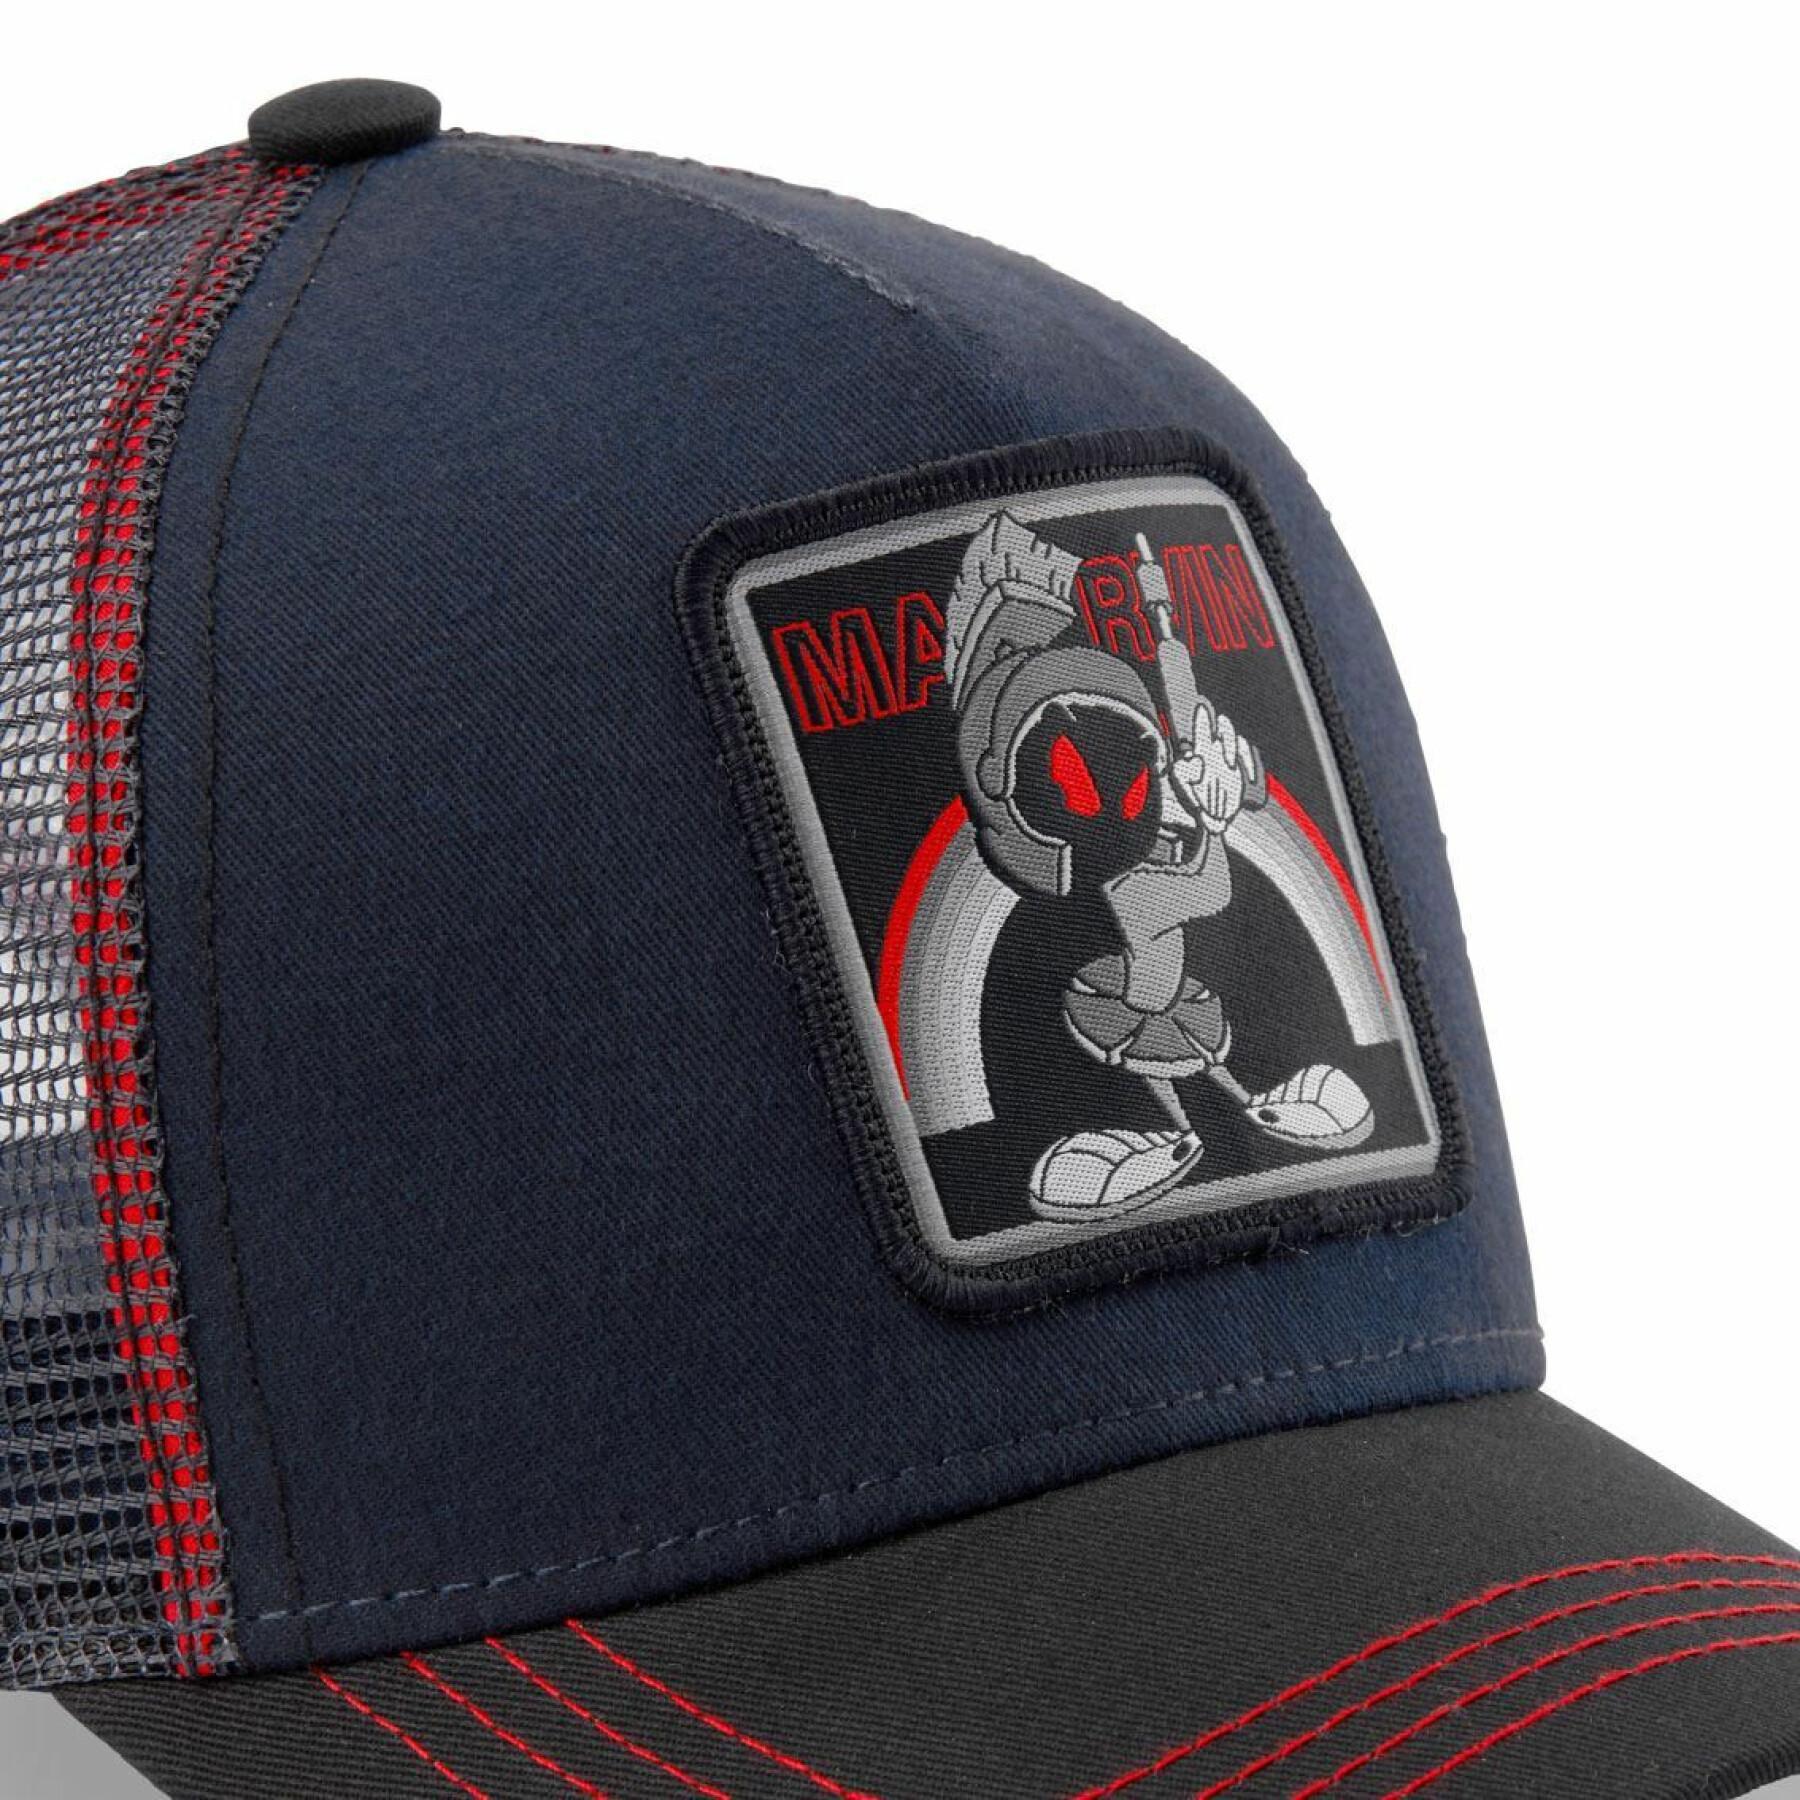 Casquette Capslab Looney Tunes Marvin the Martian